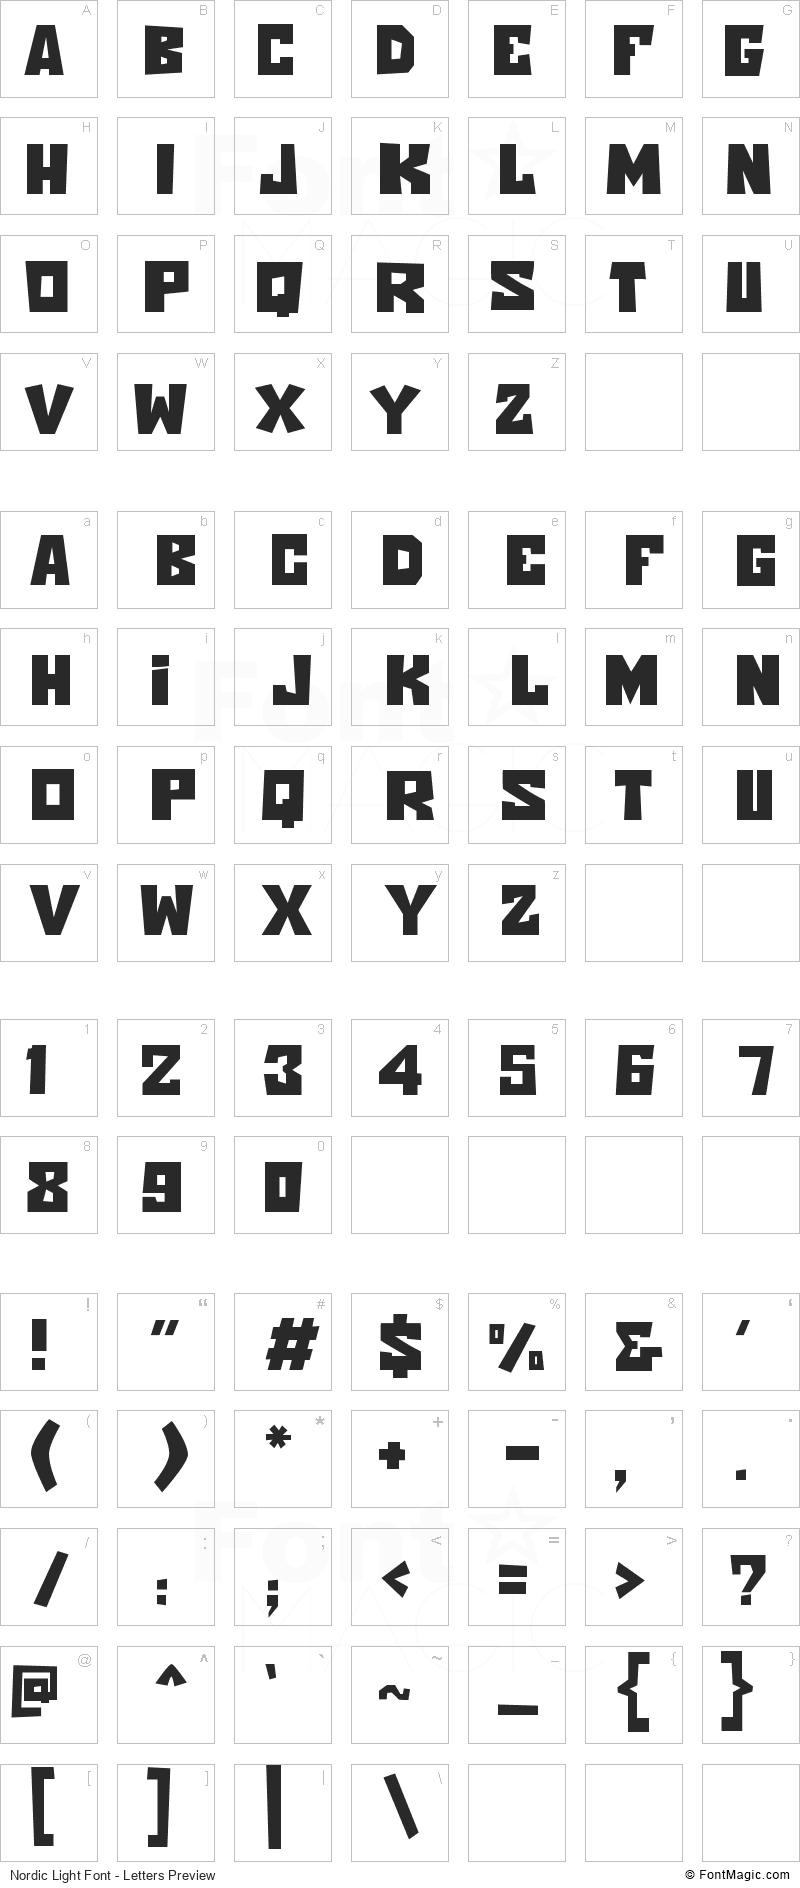 Nordic Light Font - All Latters Preview Chart